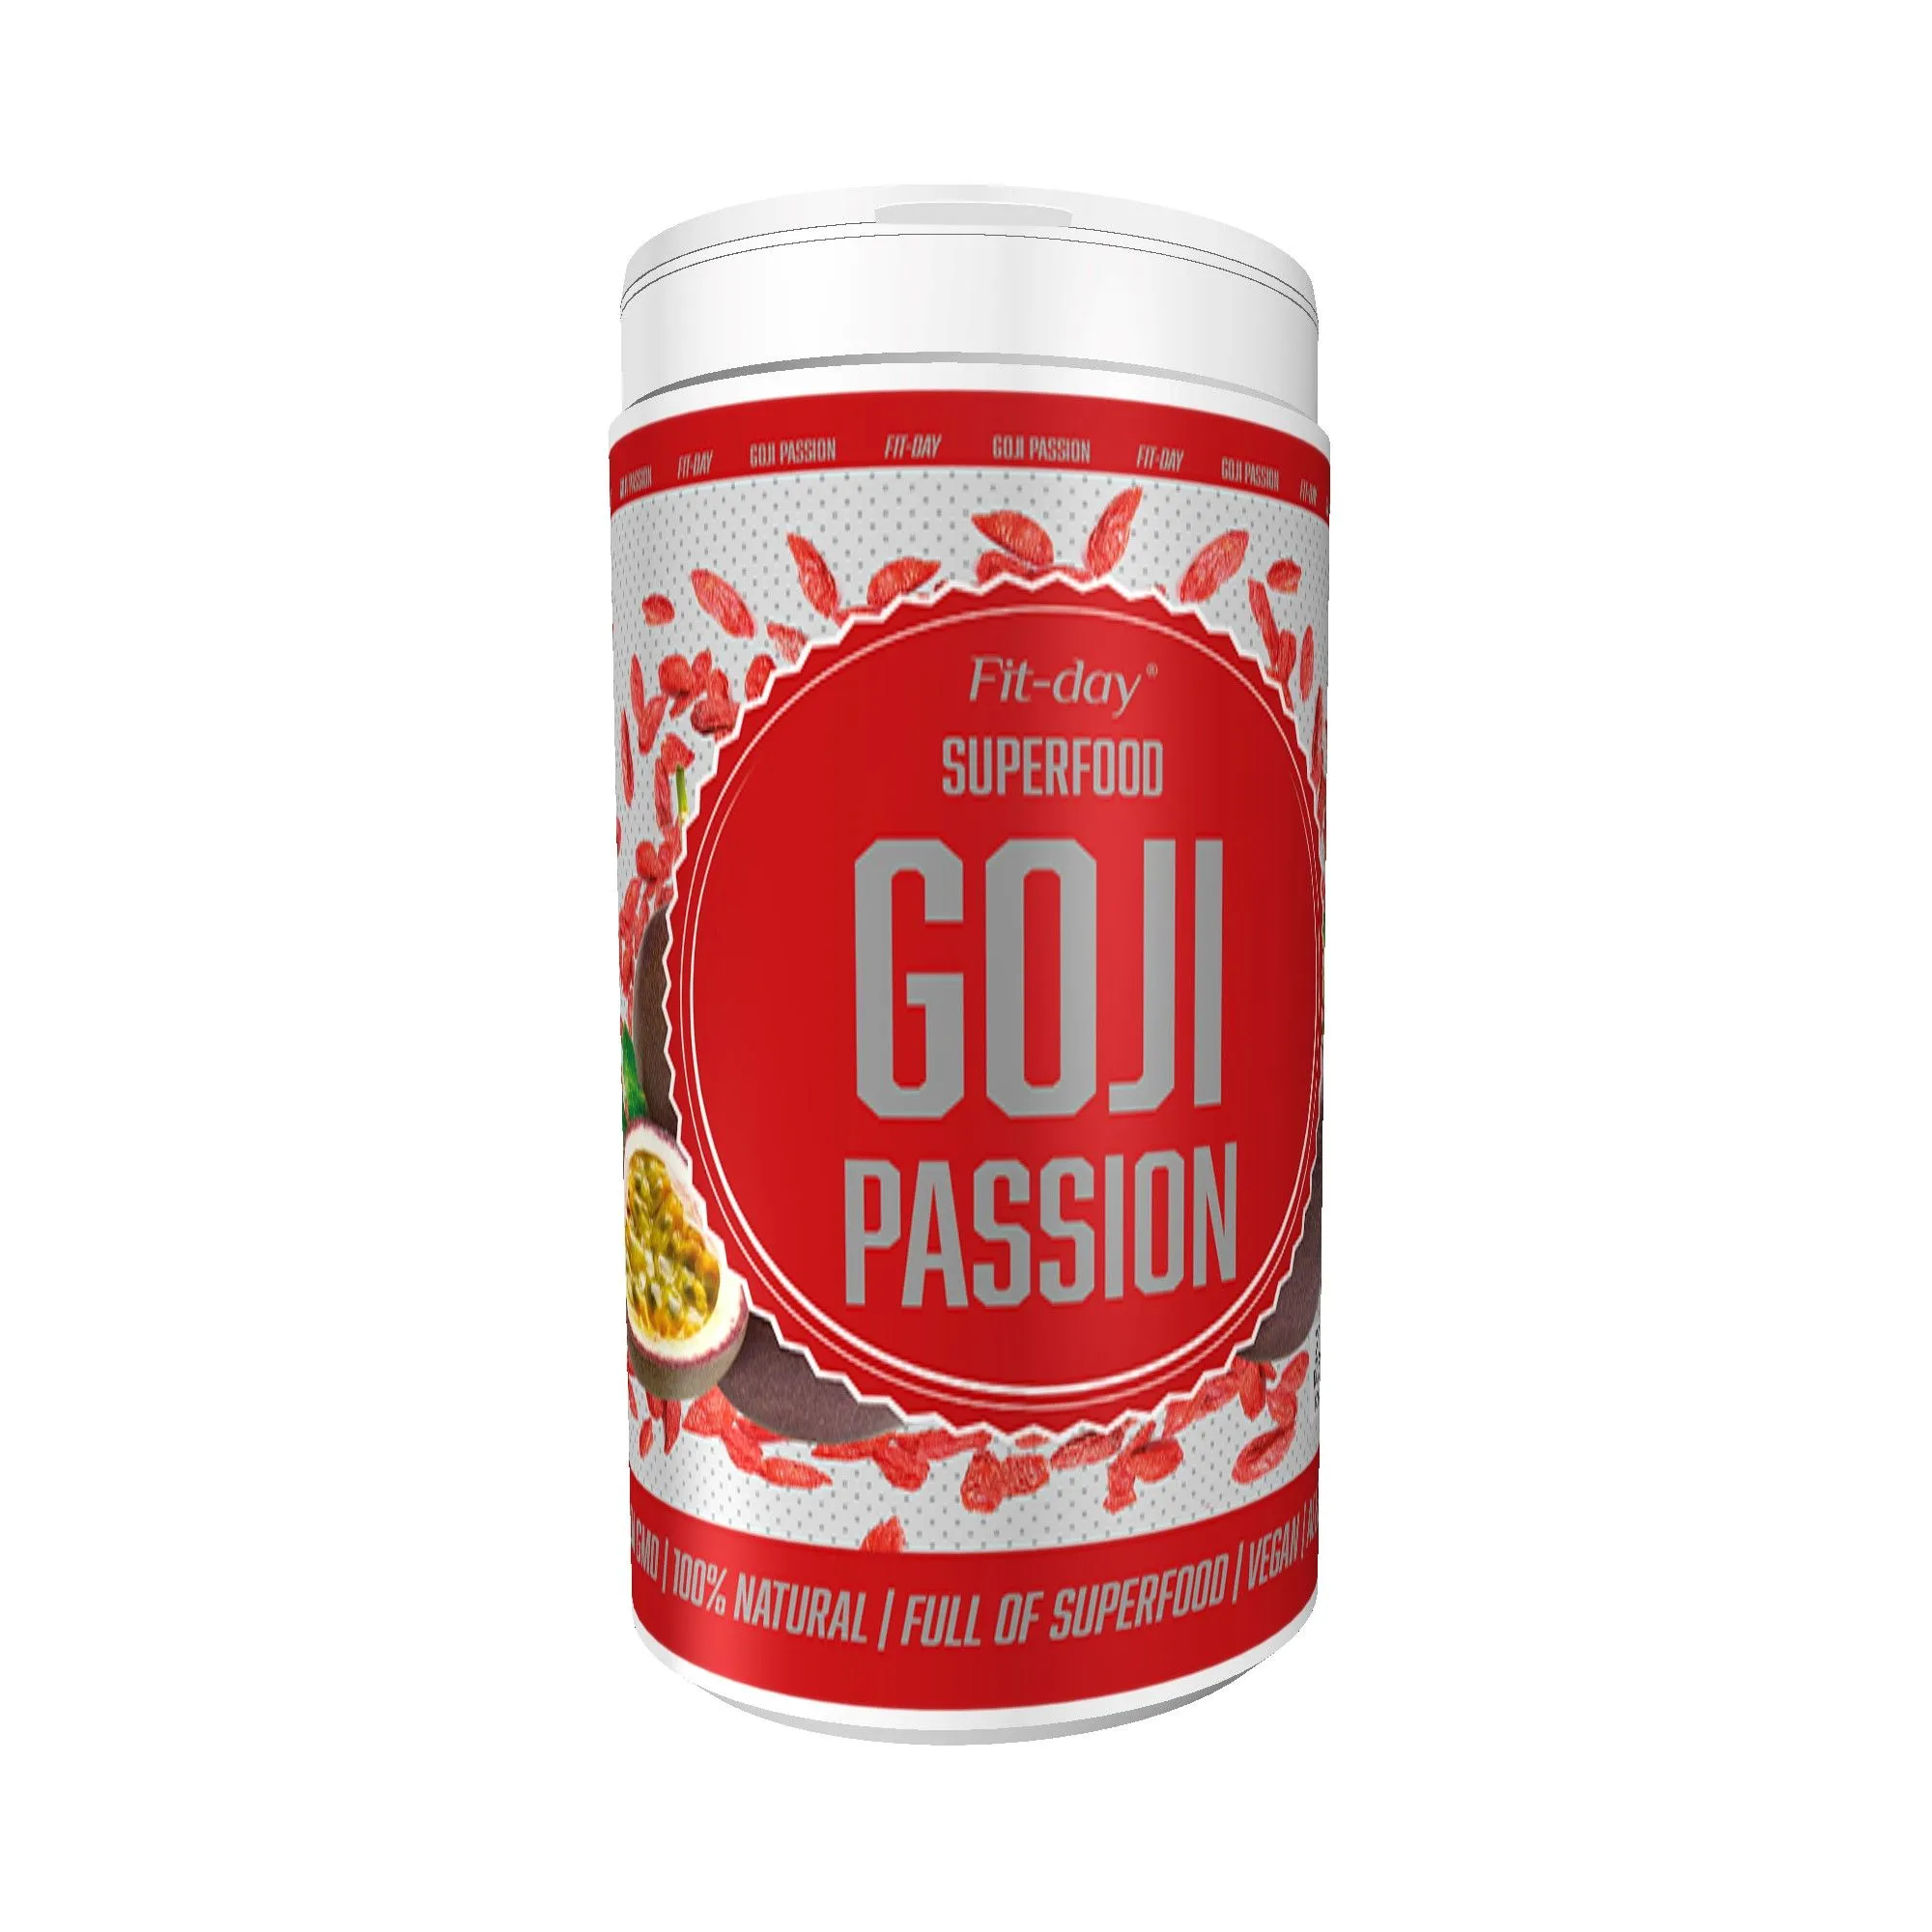 Fit-day Superfood Goji-Passion 600 g